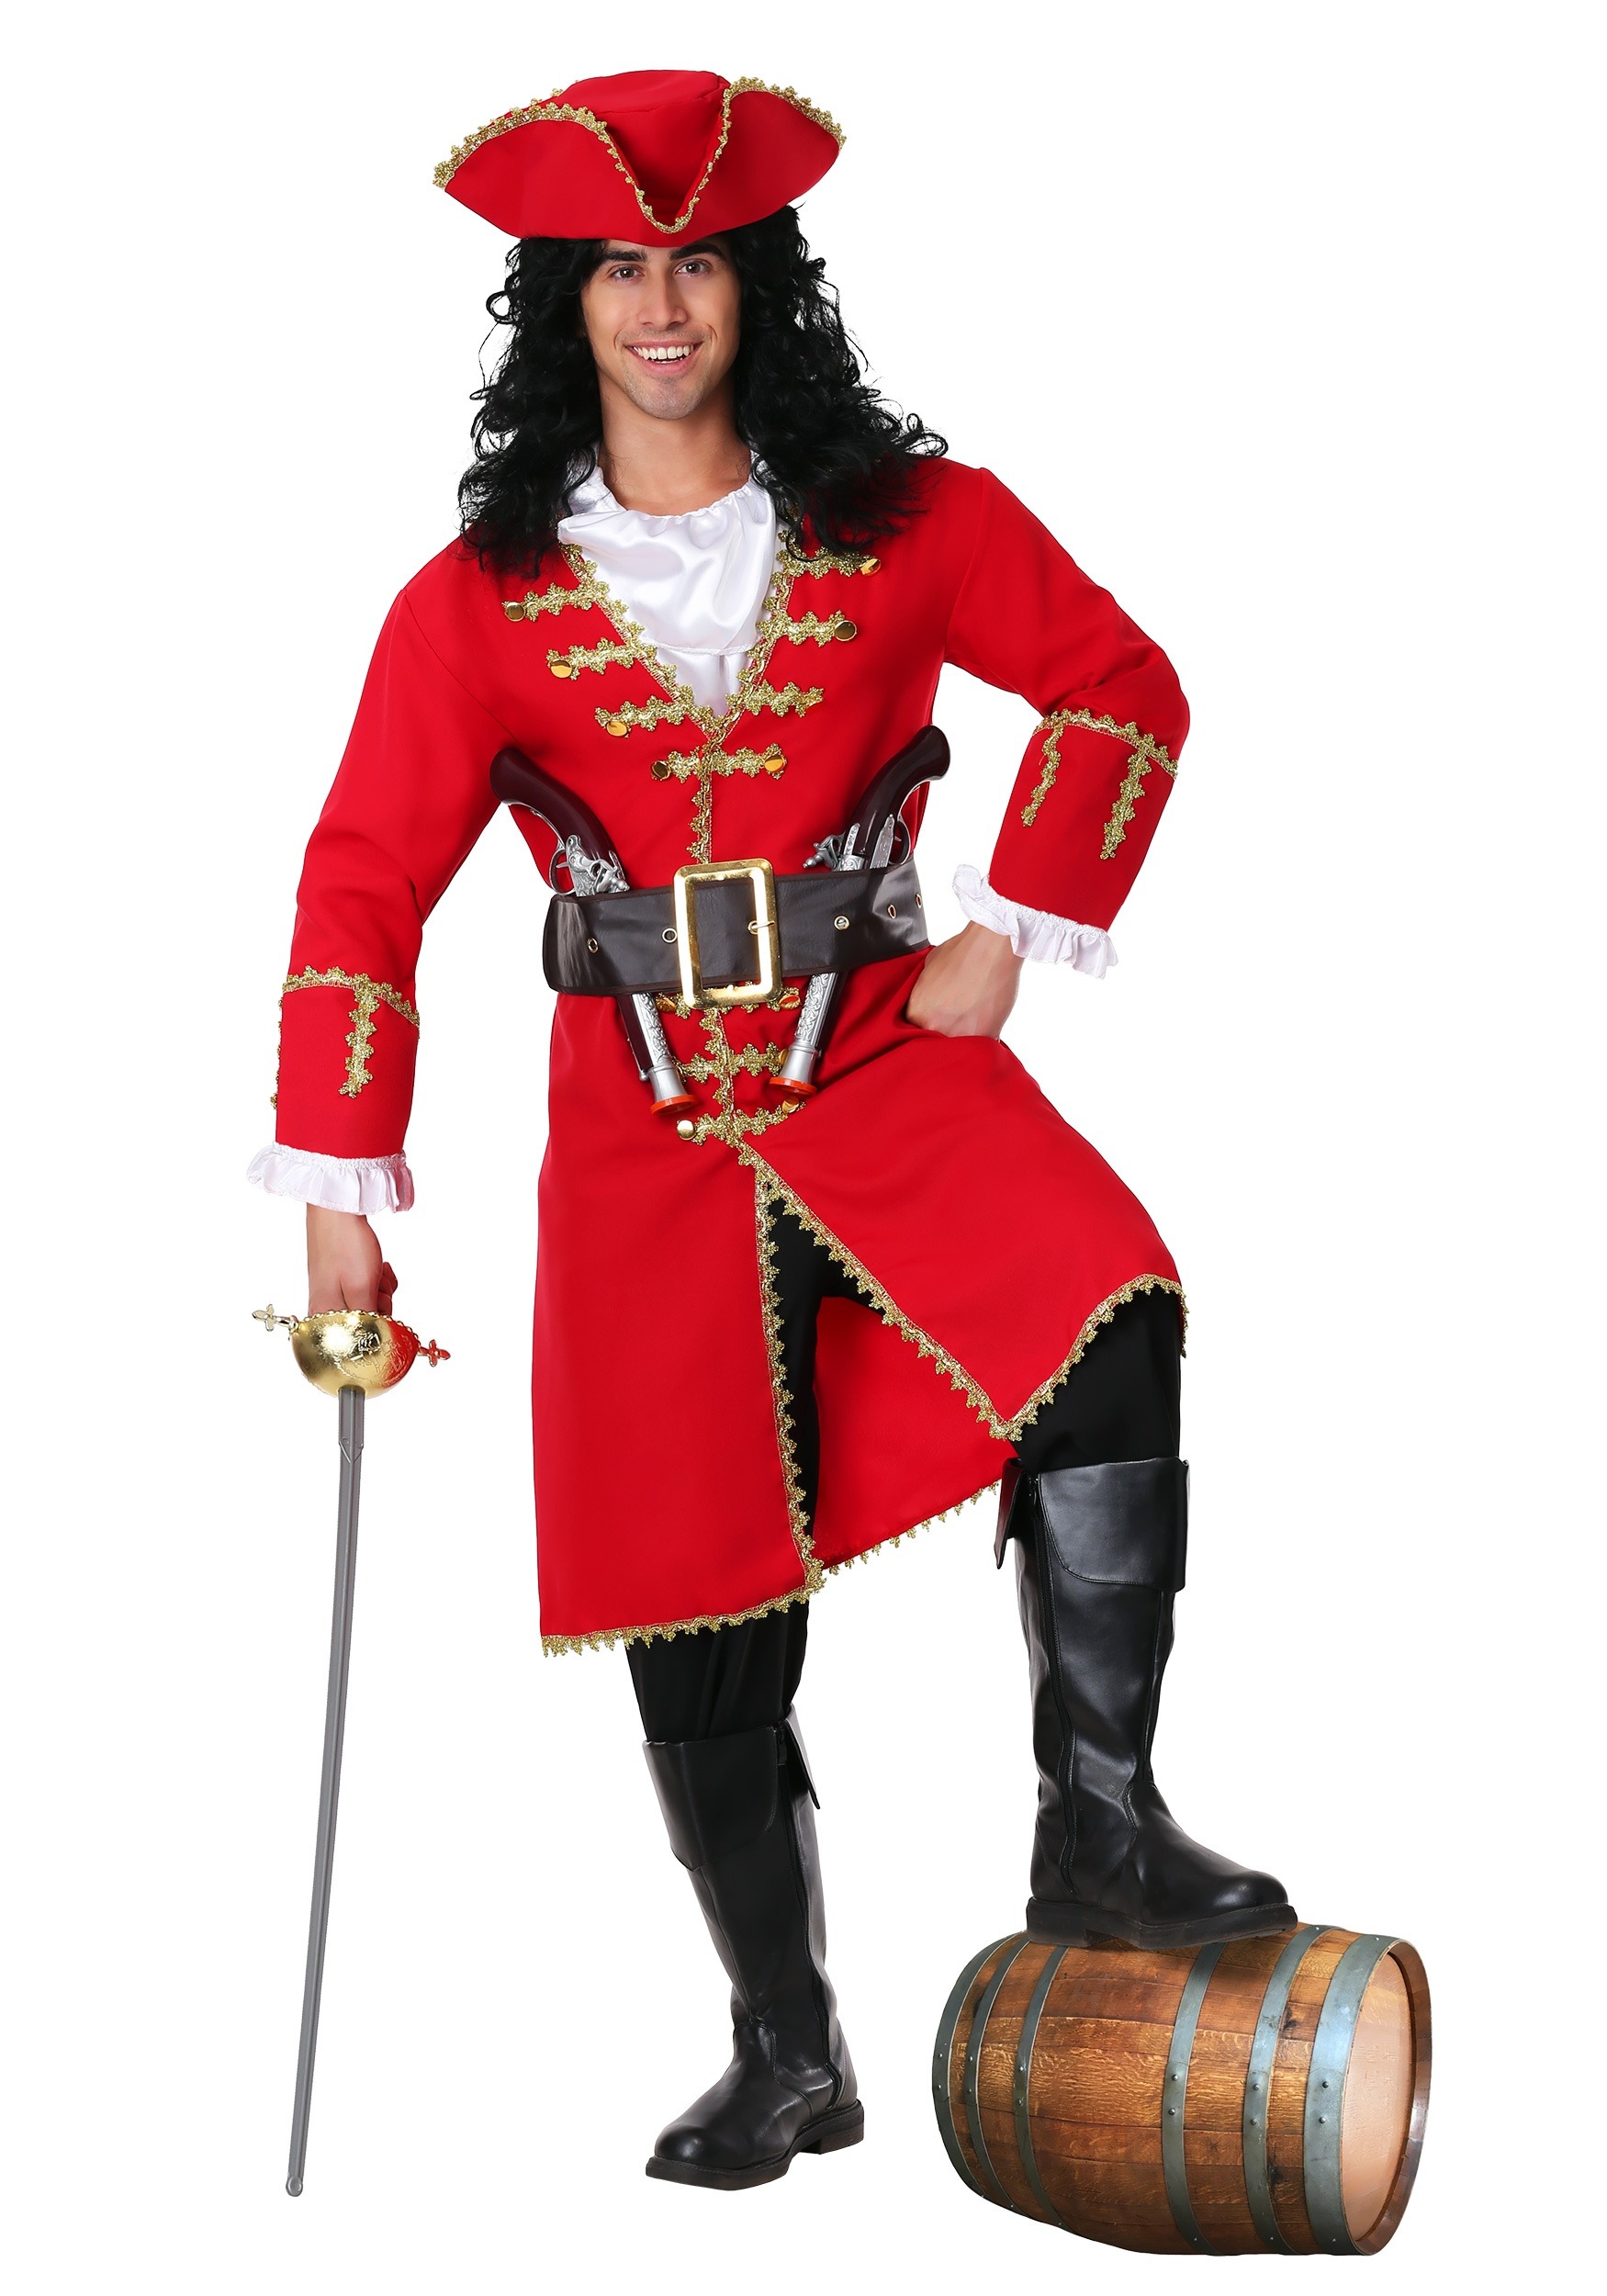 Captain Blackheart Pirate Costume - Red Pirate jacket